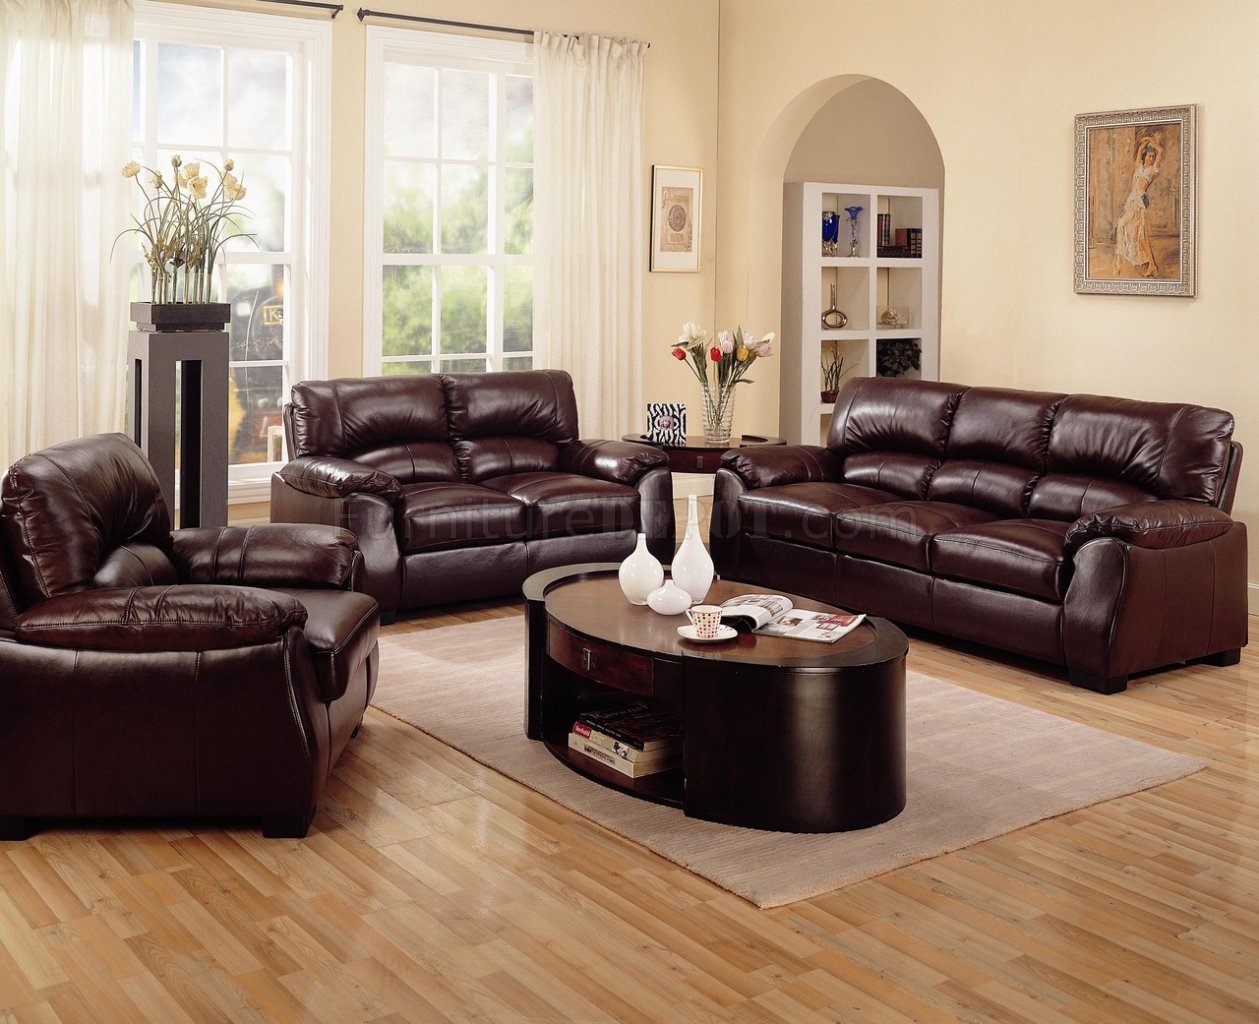 Brown Leather Couch Modern Living Room Design